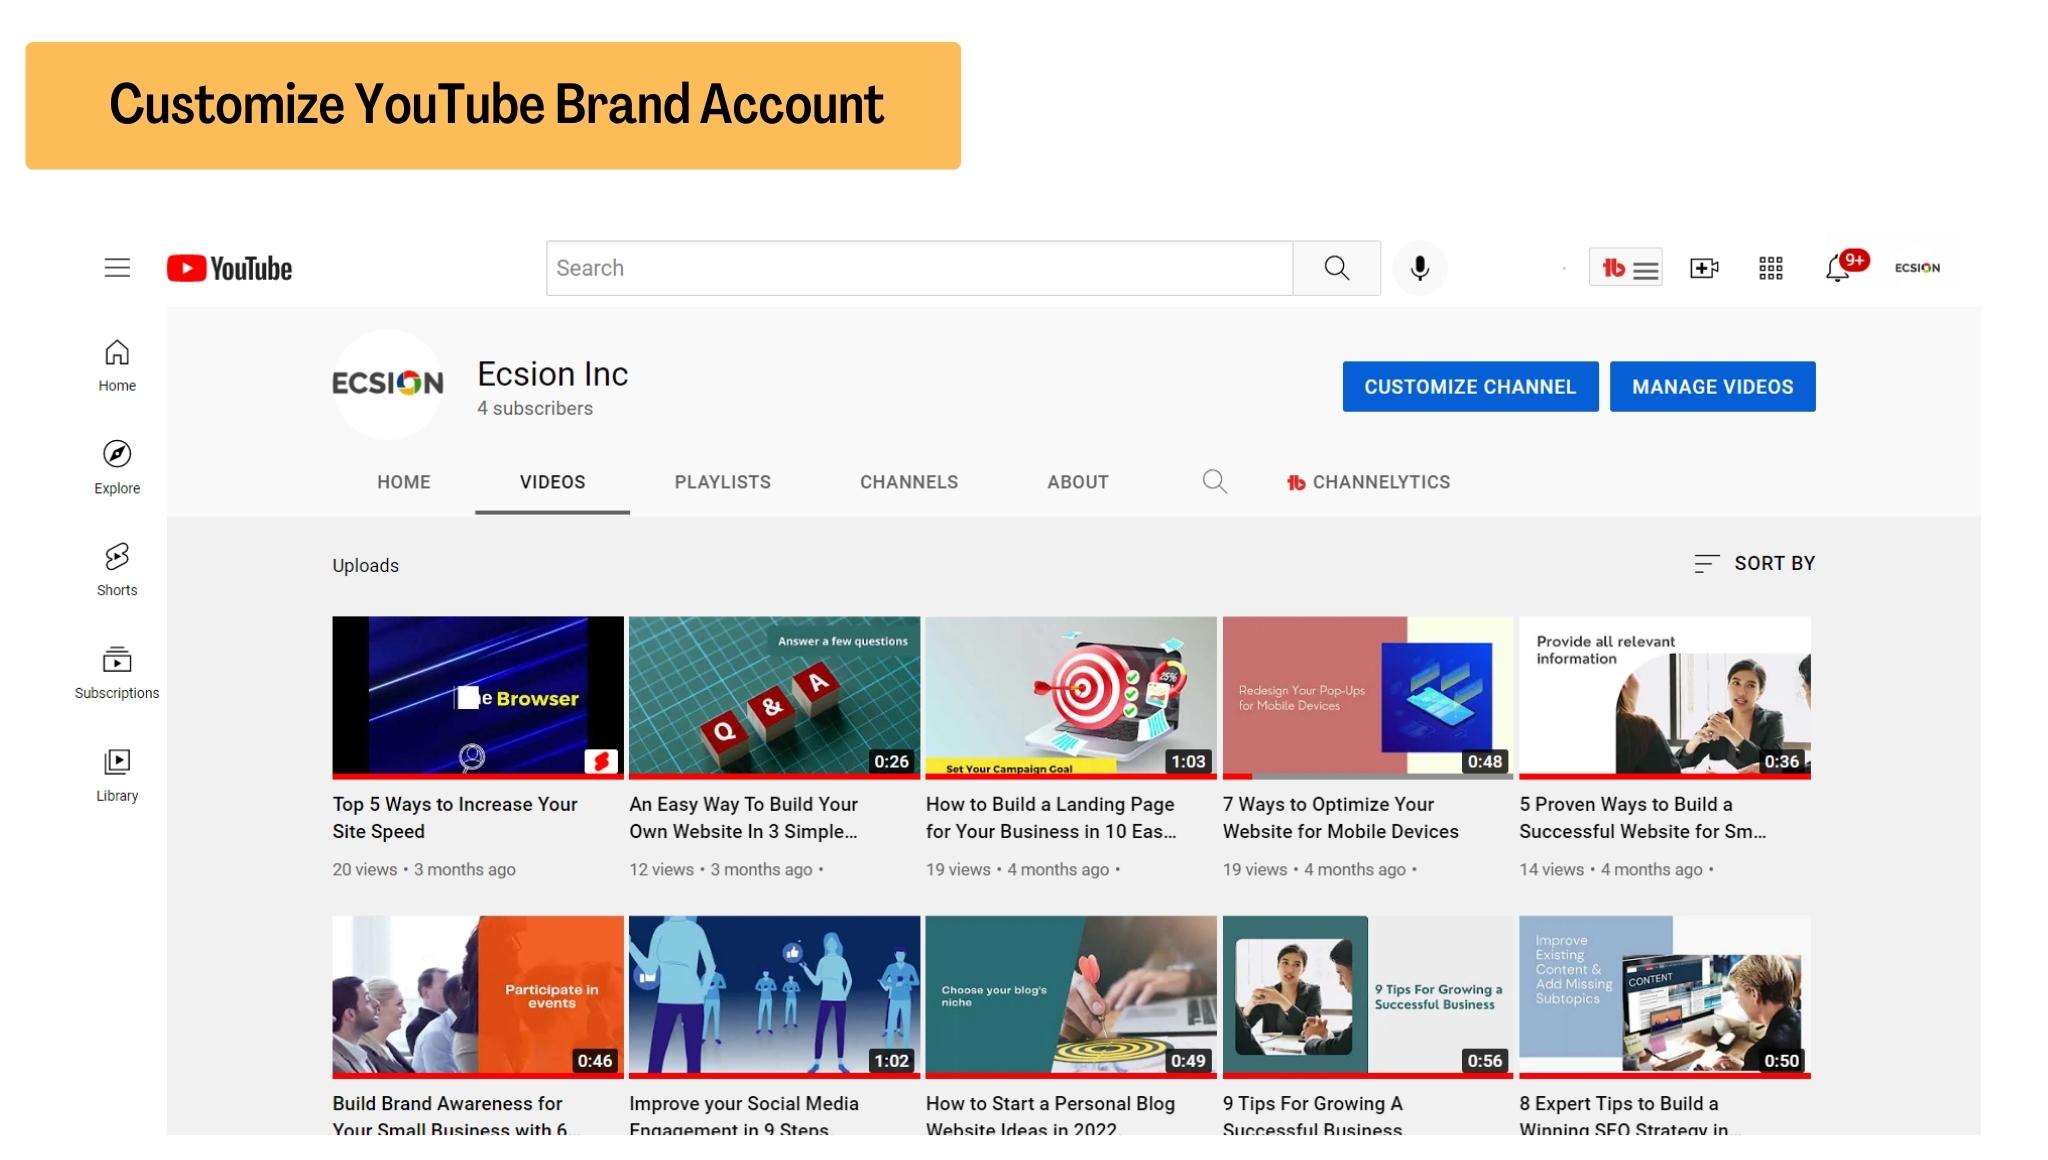 Customize your YouTube brand account